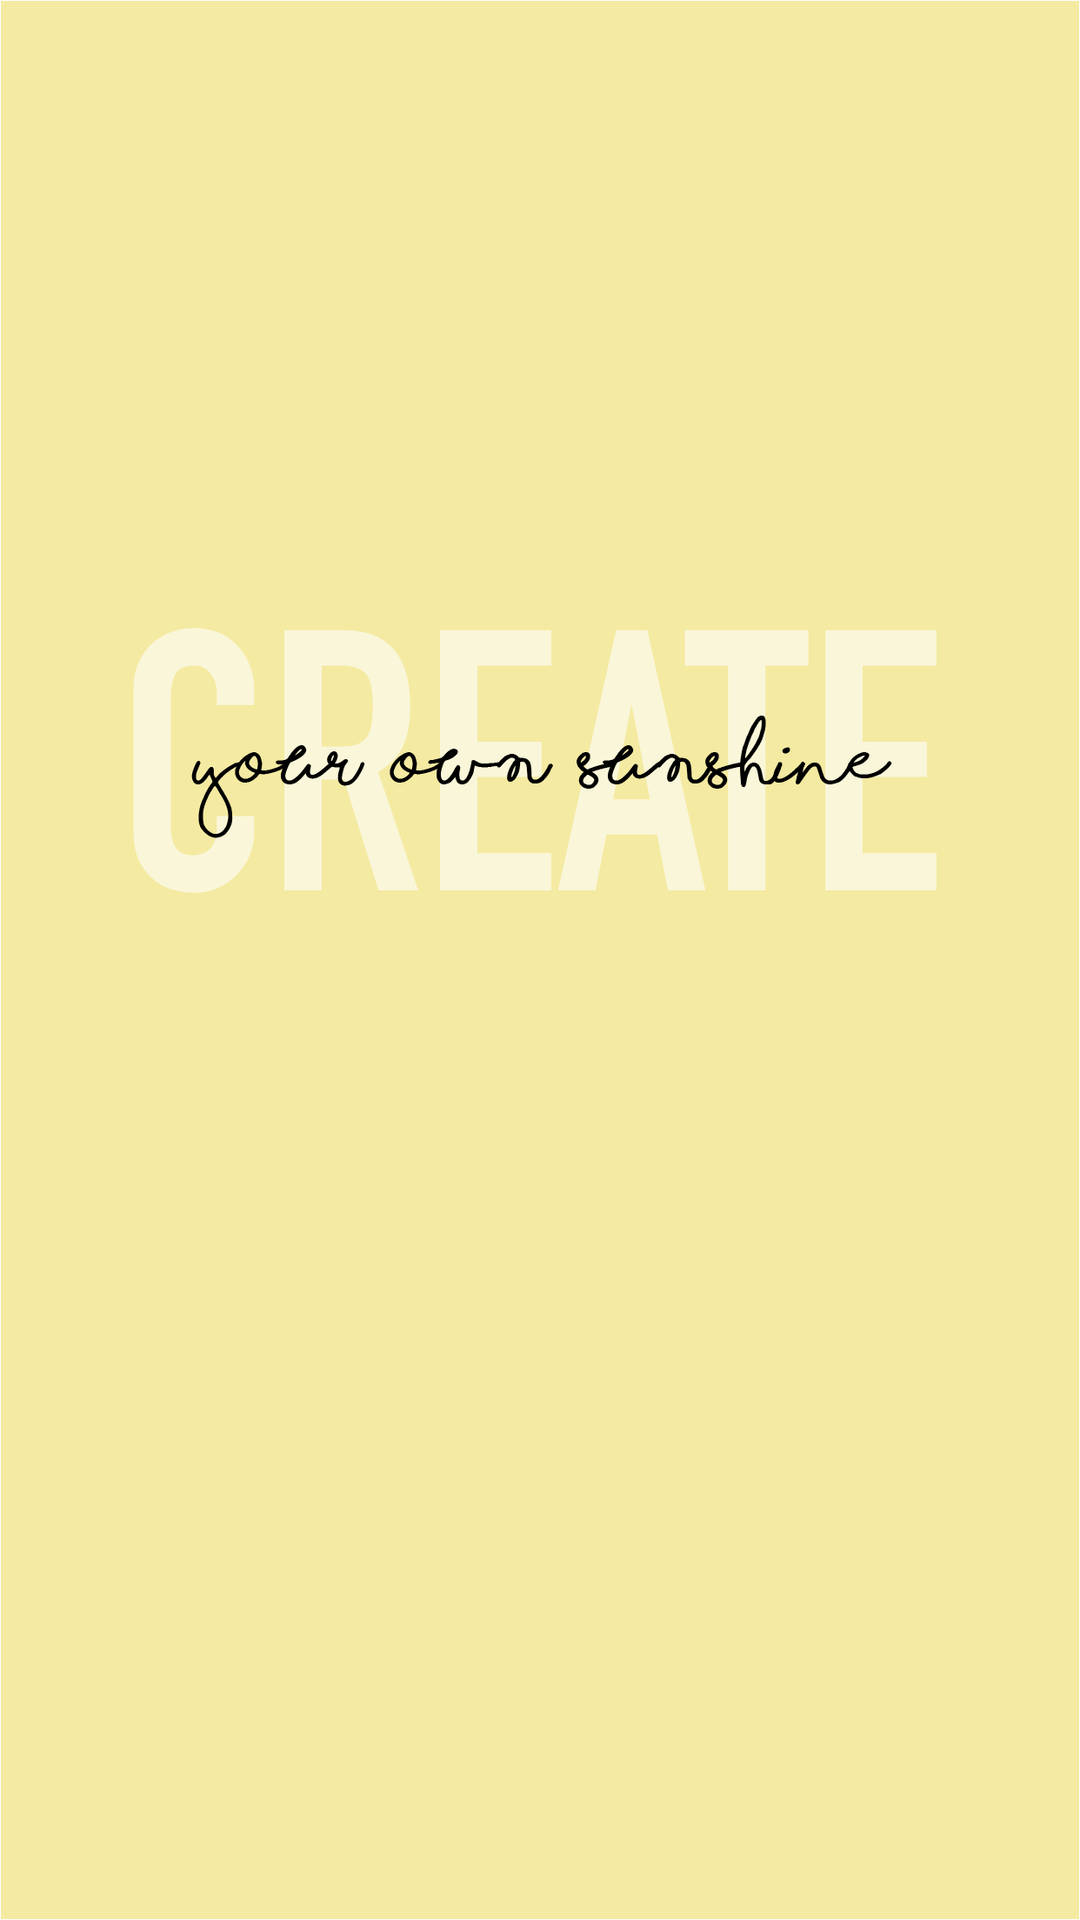 Create Your Own Sunshine Wallpaper